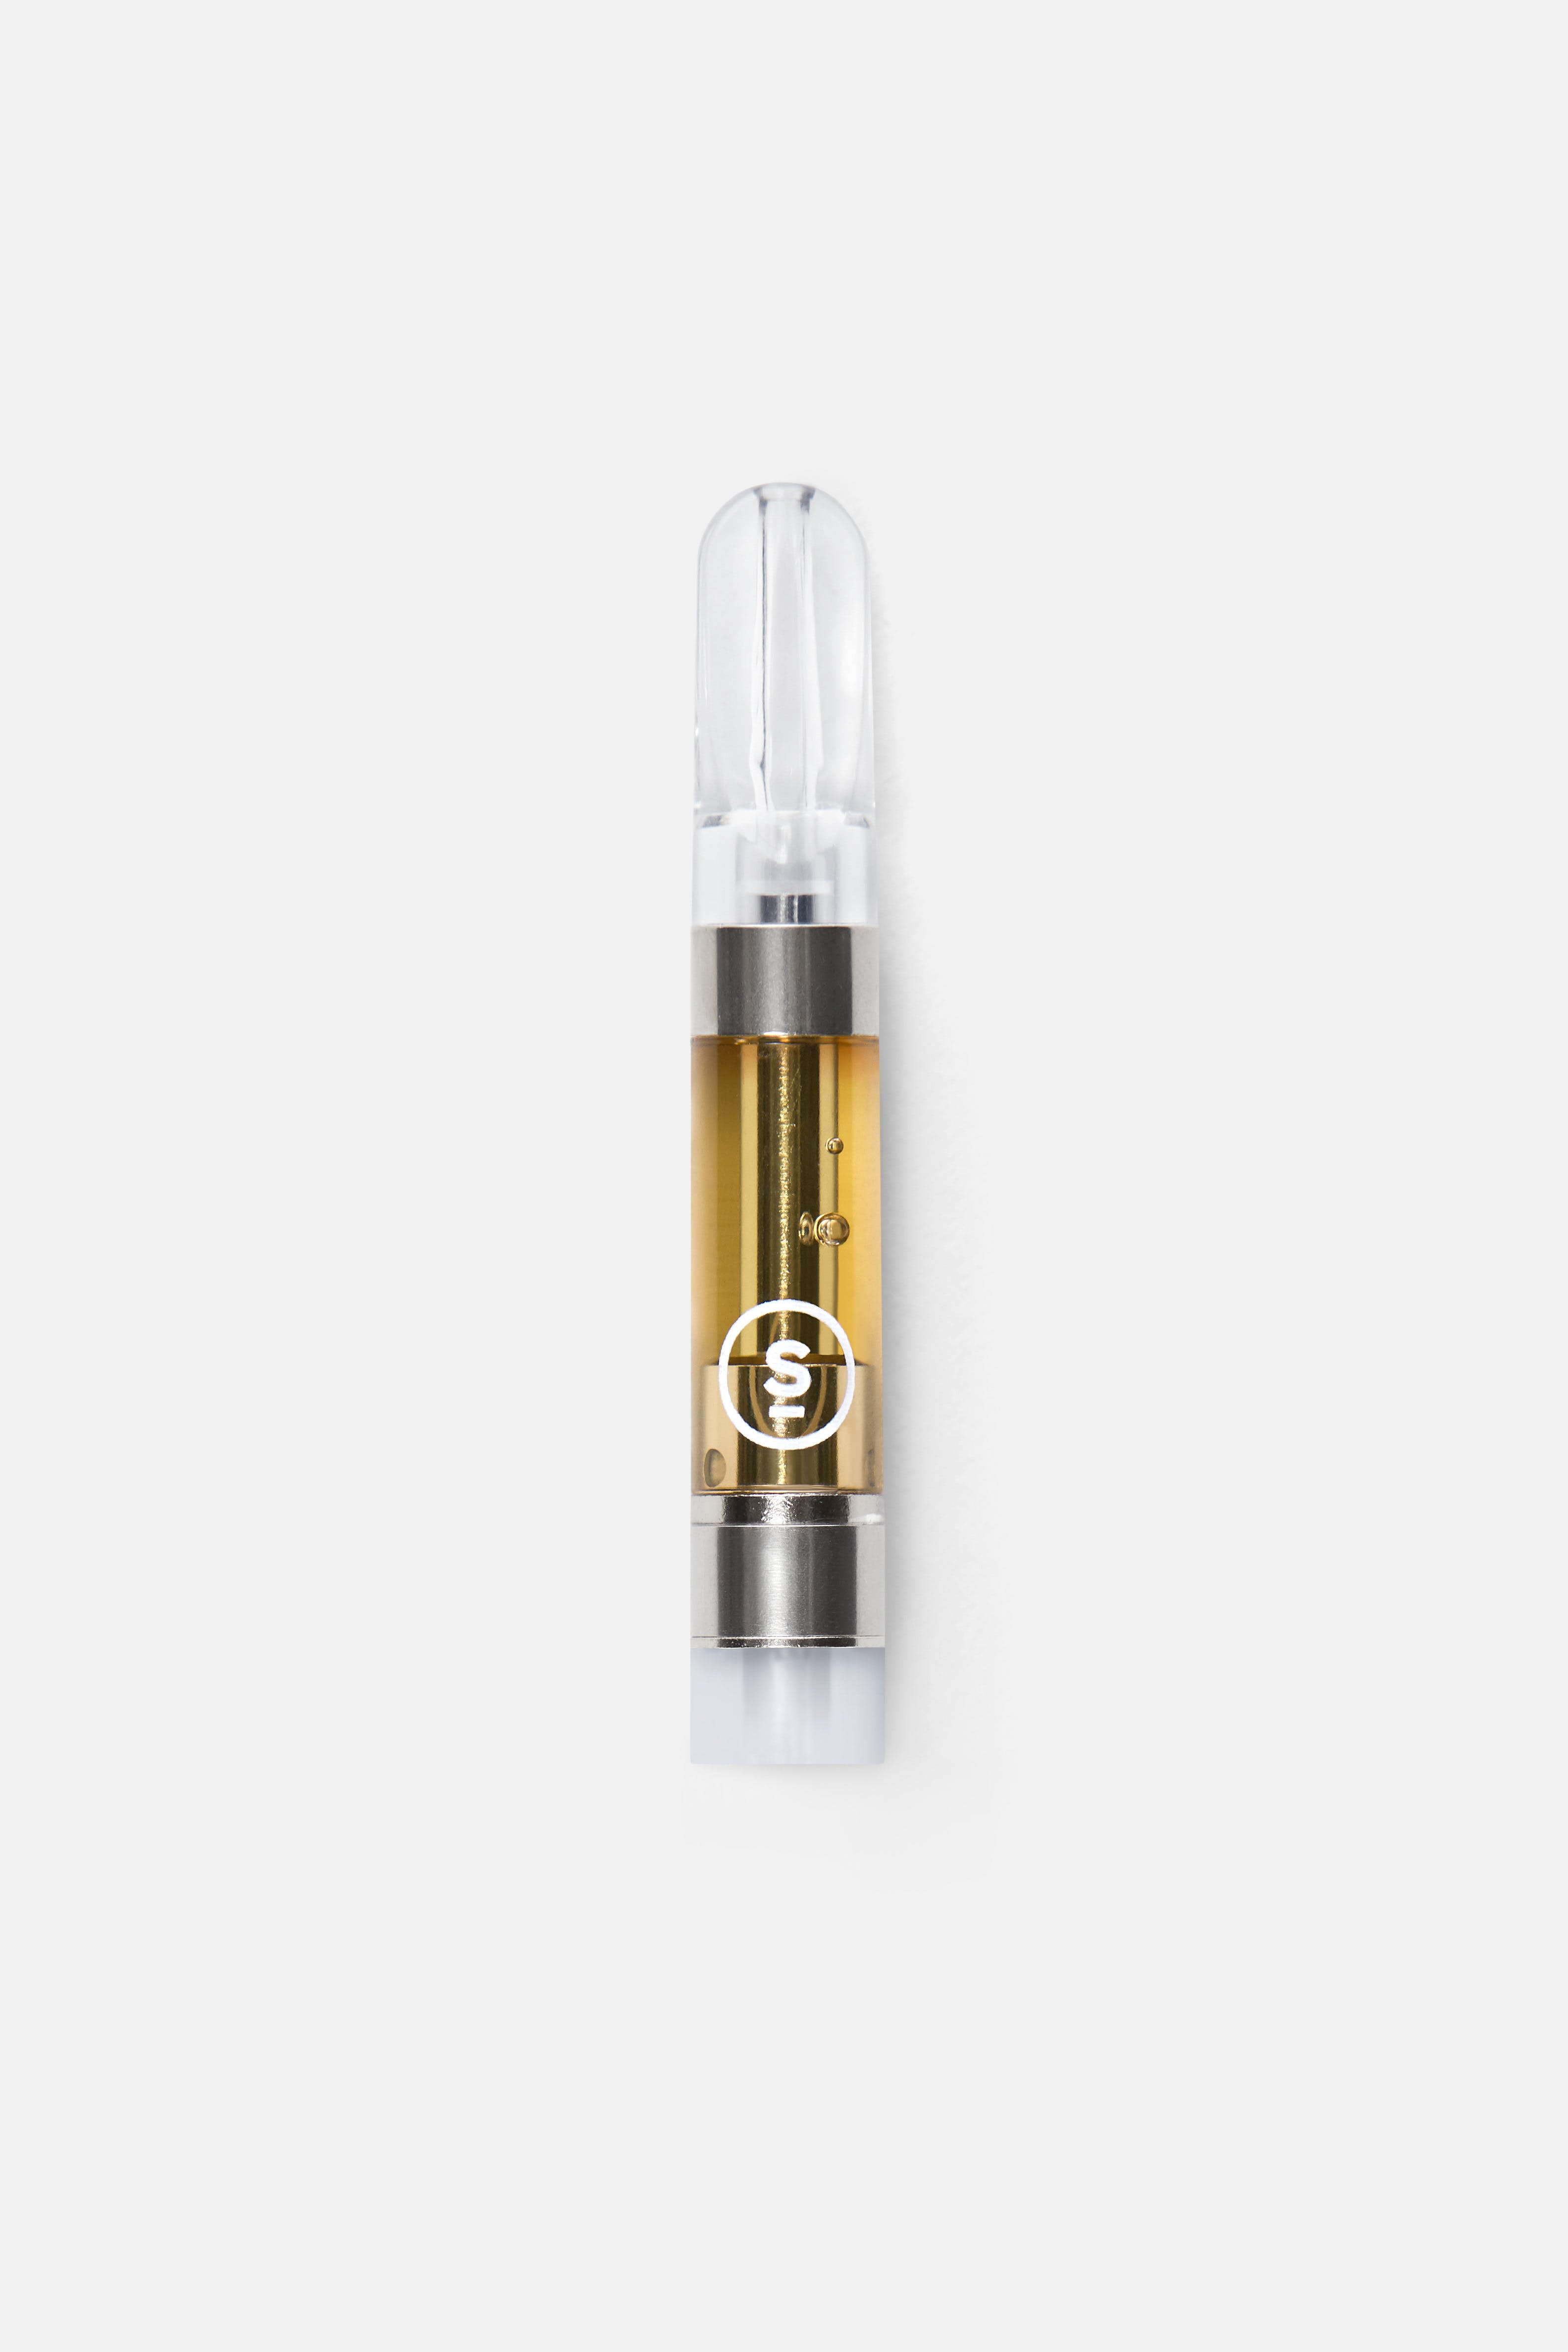 concentrate-select-elite-thc-cartridges-wifi-og-1000mg